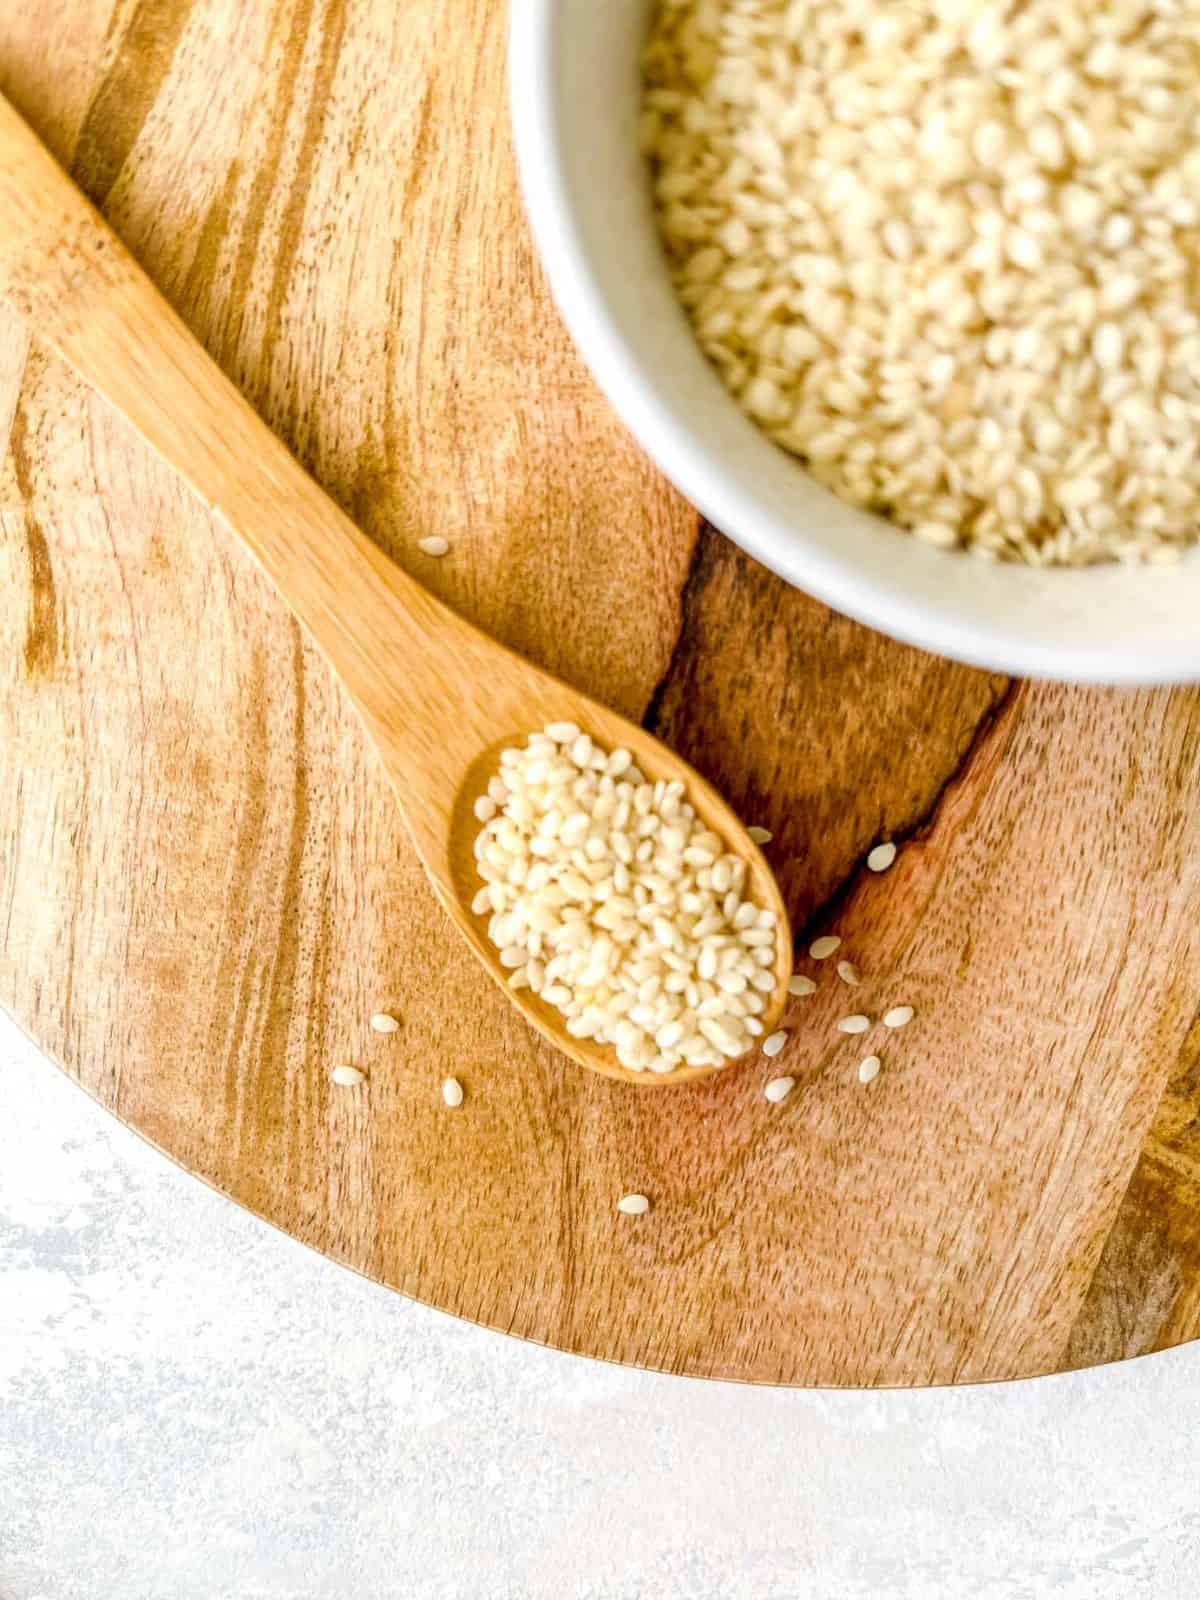 sesame seeds in a white bowl and on a wooden spoon on a wooden board.